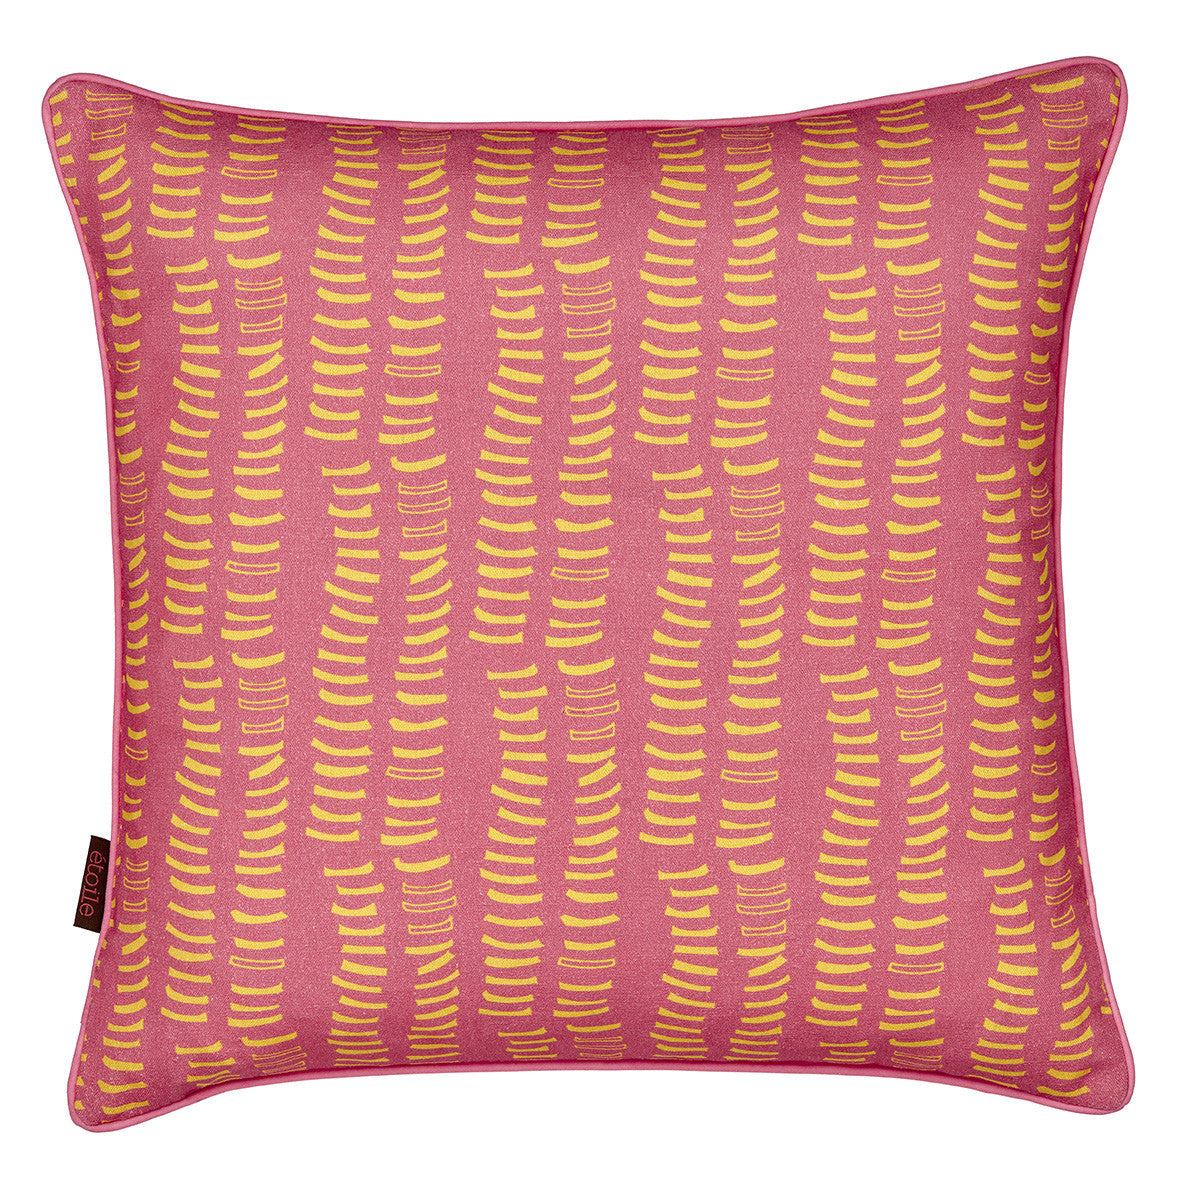 Graphic Rib Pattern Linen Union Printed Decorative Throw Pillow in Coral Pink and Mustard Yellow 45x45cm (18x18")